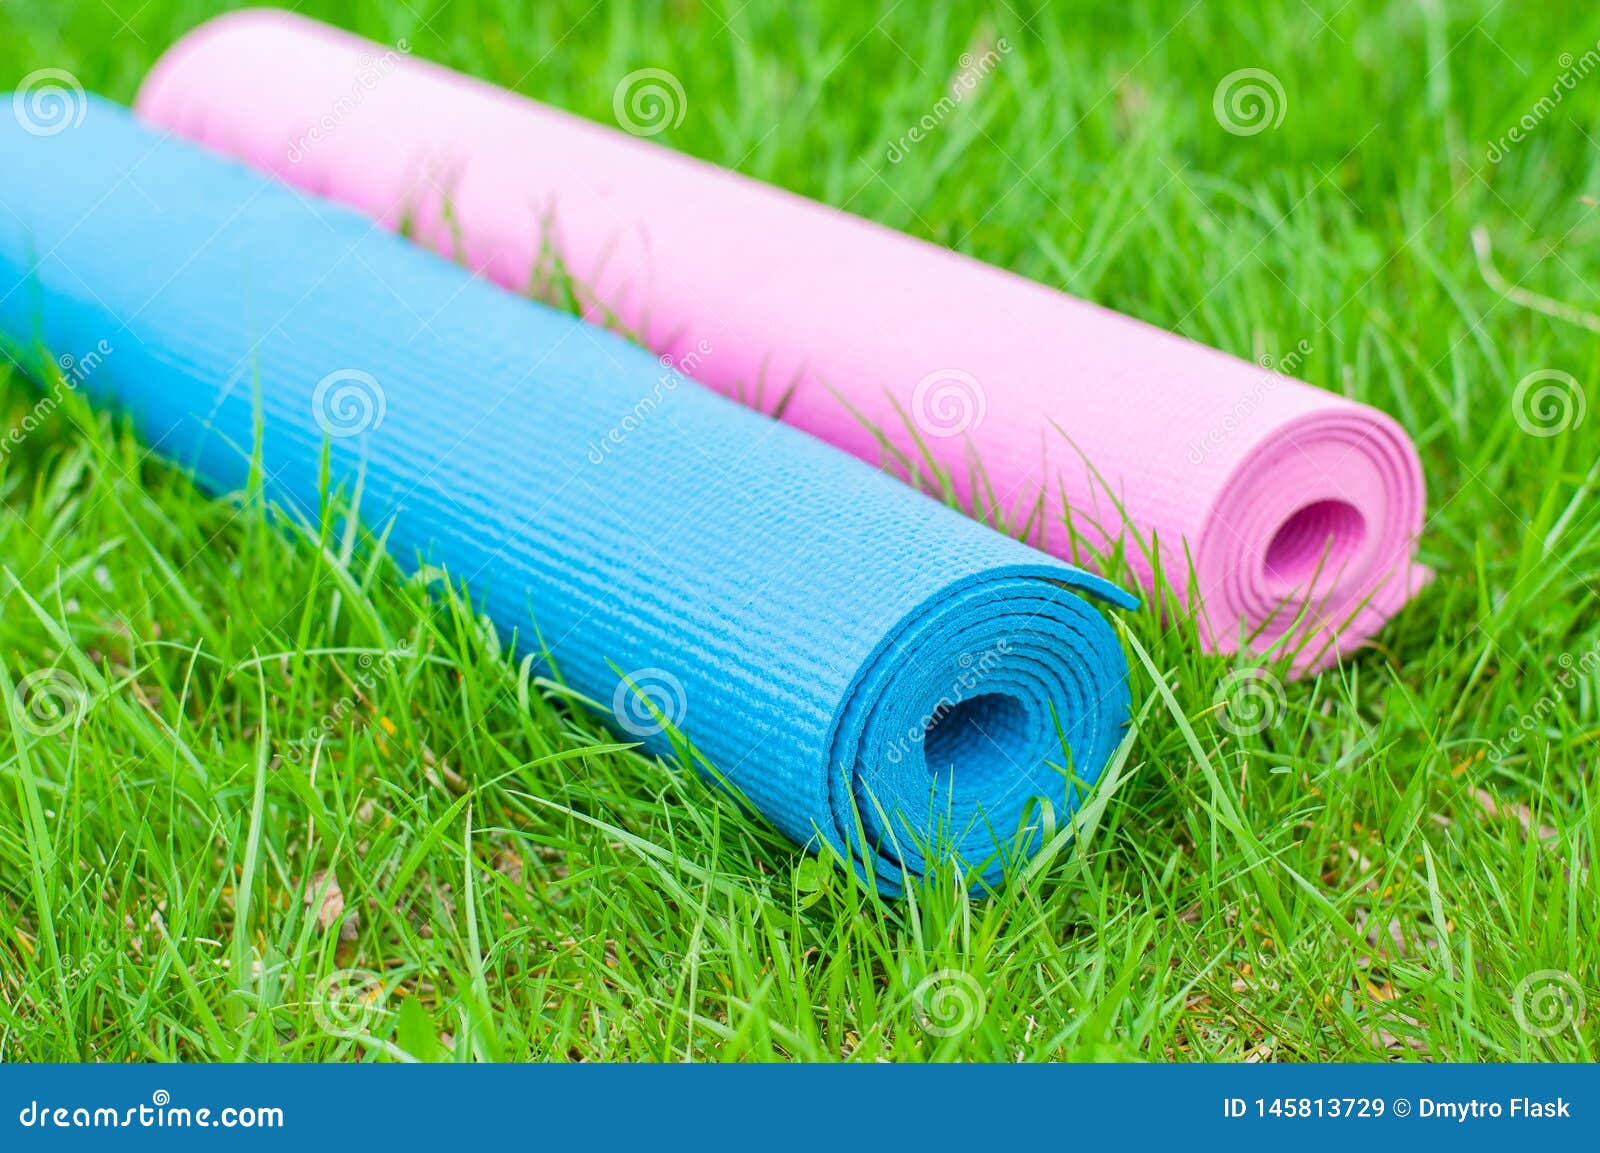 Yoga Mats On The Grass. Fitness Concept 